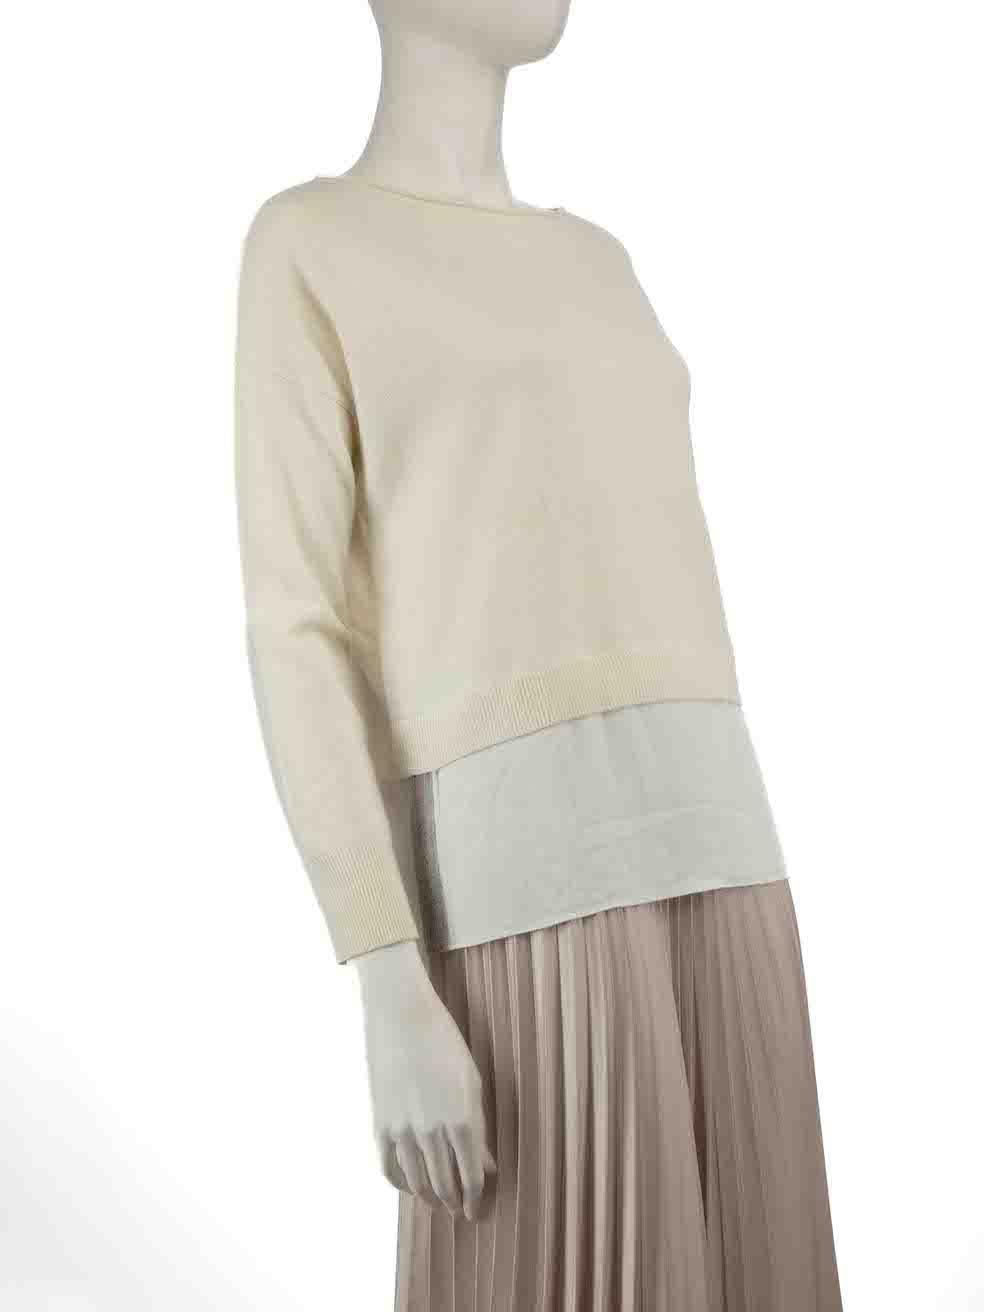 CONDITION is Very good. Hardly any visible wear to jumper is evident on this used Fabiana Filippi designer resale item.
 
 
 
 Details
 
 
 Cream
 
 Wool
 
 Long sleeves jumper
 
 Knitted and stretchy
 
 Wide neckline
 
 Silk beaded panel
 
 
 
 
 
